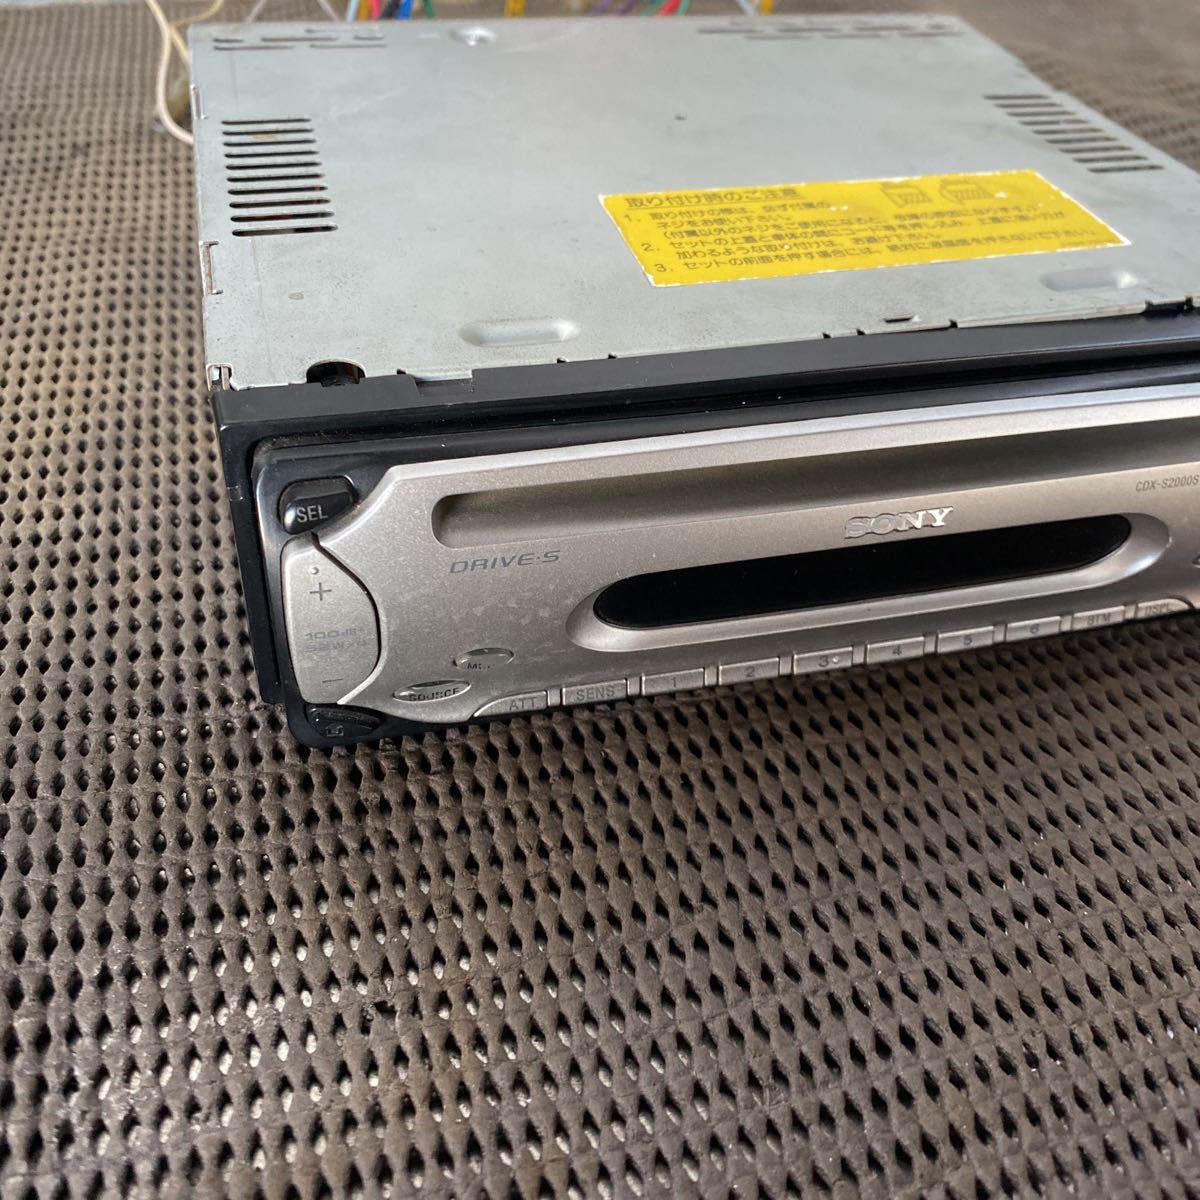 SONY FM/AM COMPACT DISC PLAYER MODEL NO.CDX-S2000S operation not yet verification Junk 